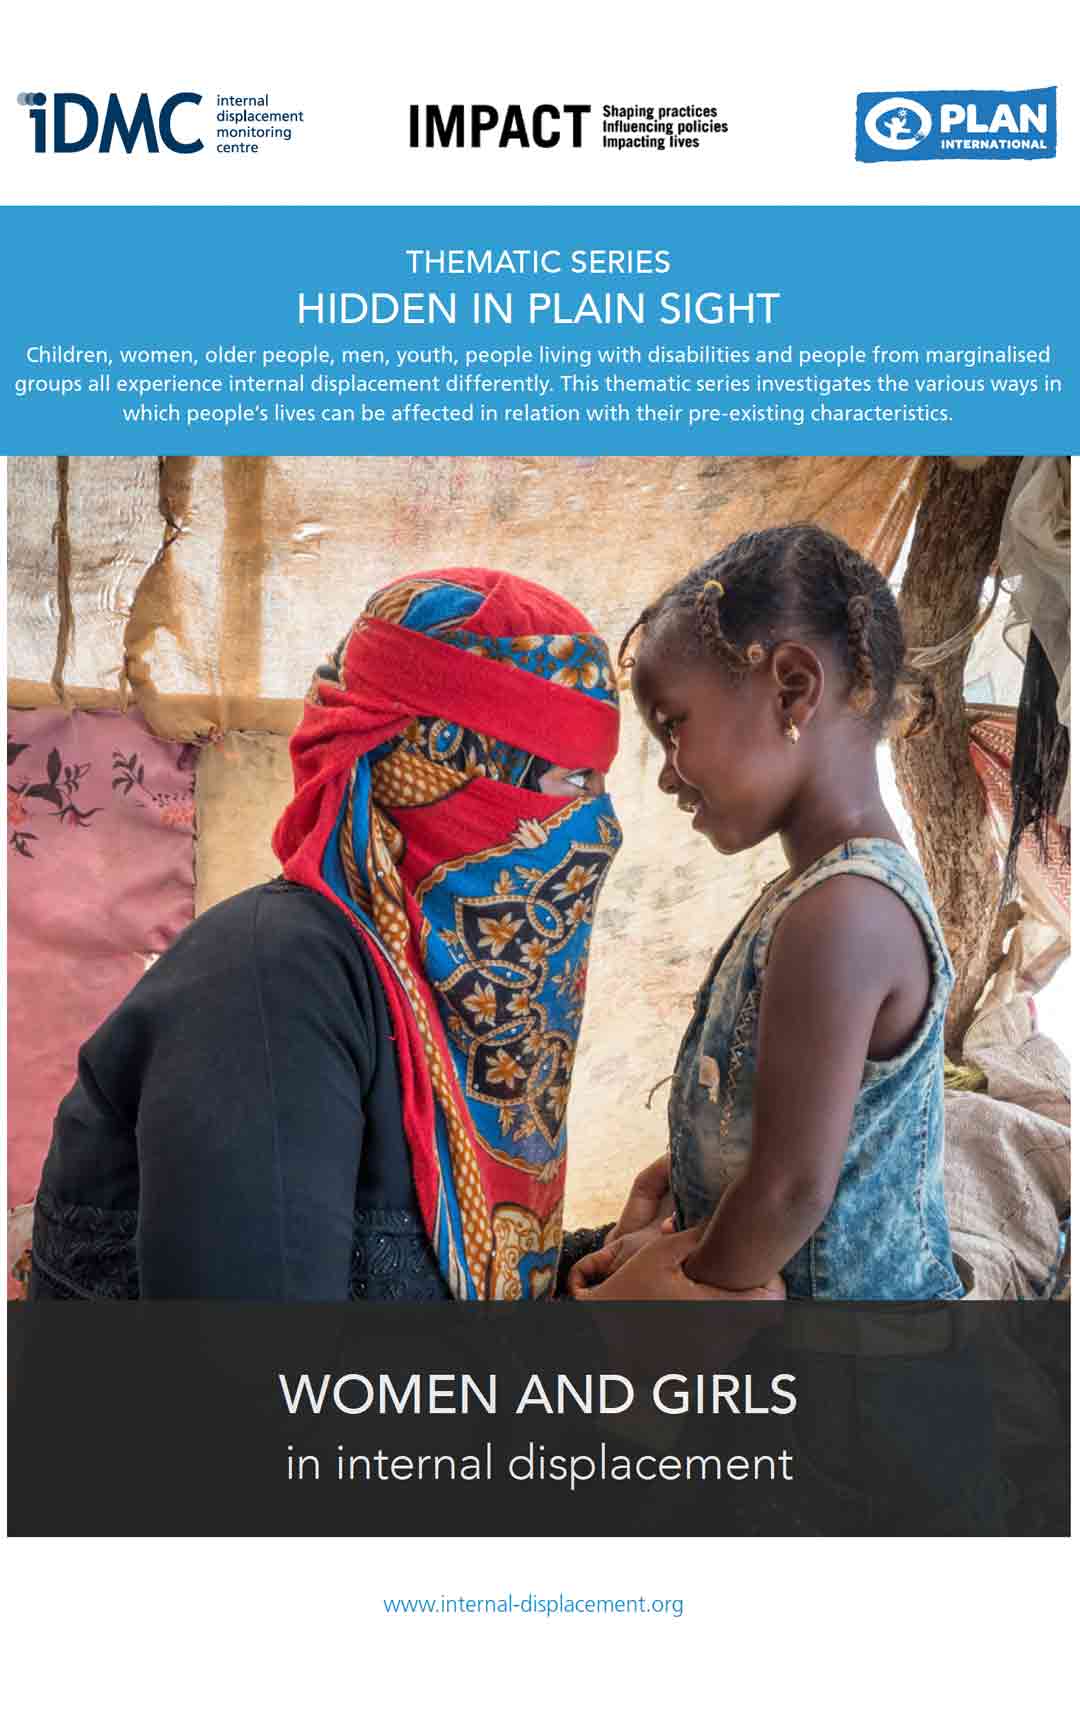 Women and girls in internal displacement